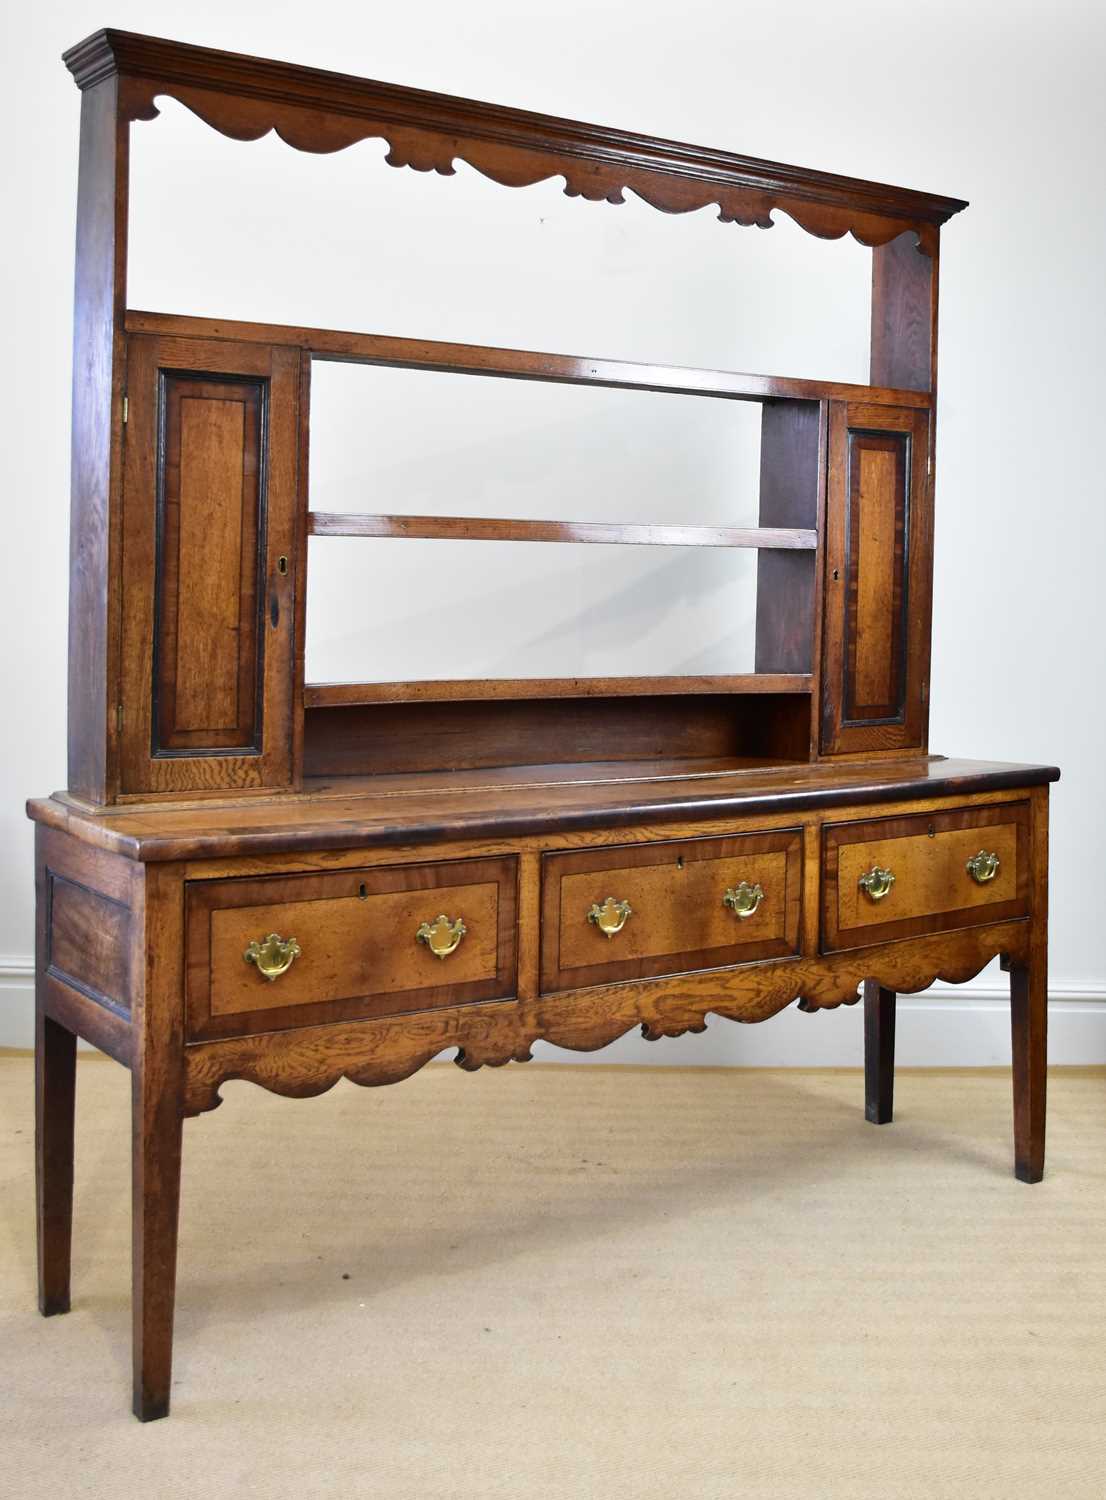 An 18th century oak and mahogany crossbanded dresser with open plate rack back, with three fixed